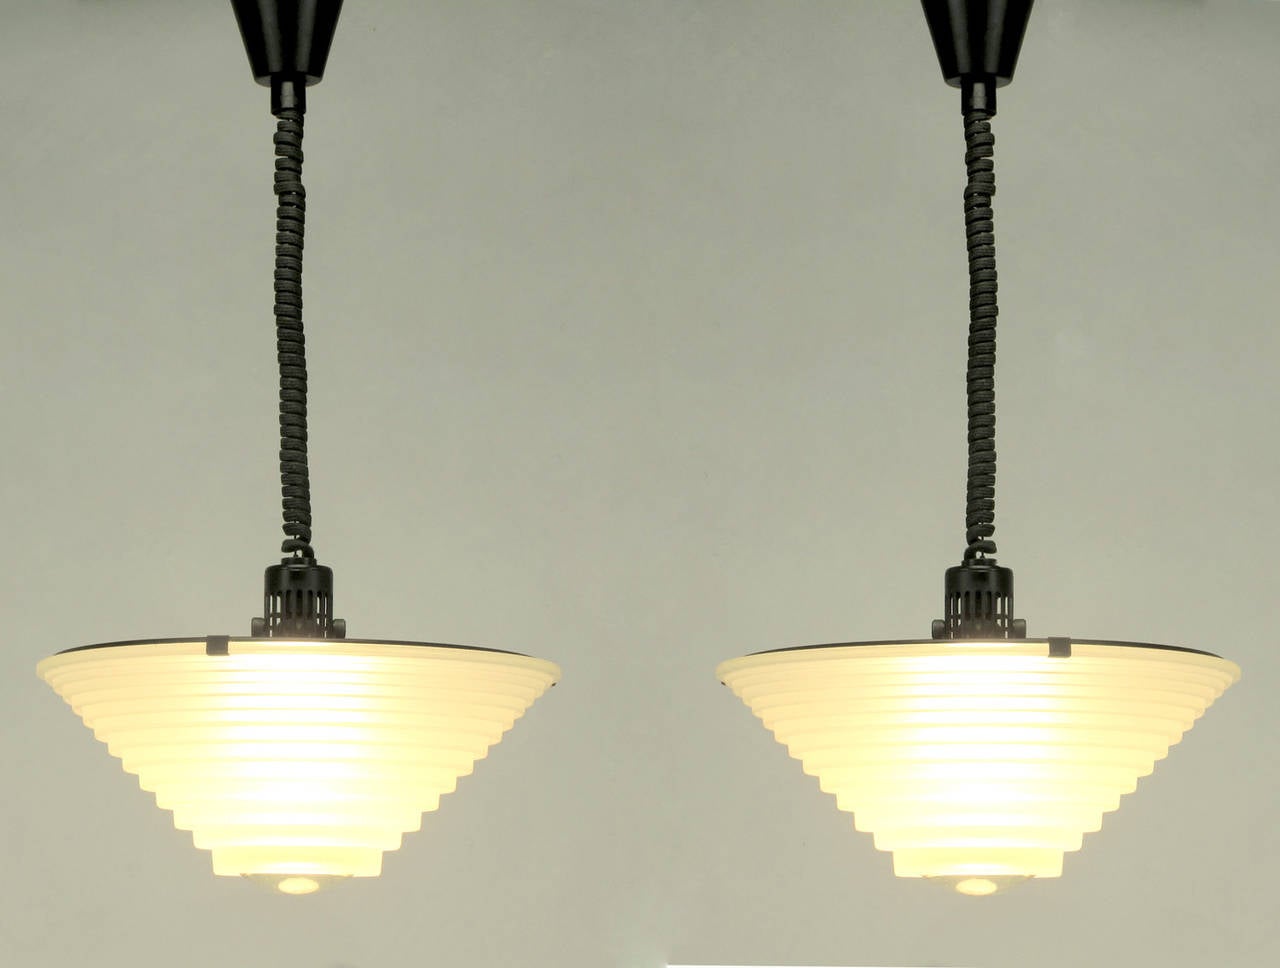 Art Deco meets Industrial in this pair of pendant lights by Angelo Mangiarotti for Artemide, Italy. Satin black metal disc fitters with white underside and sandblasted thick graduated glass shades with magnifying centre lenses. Each light has an